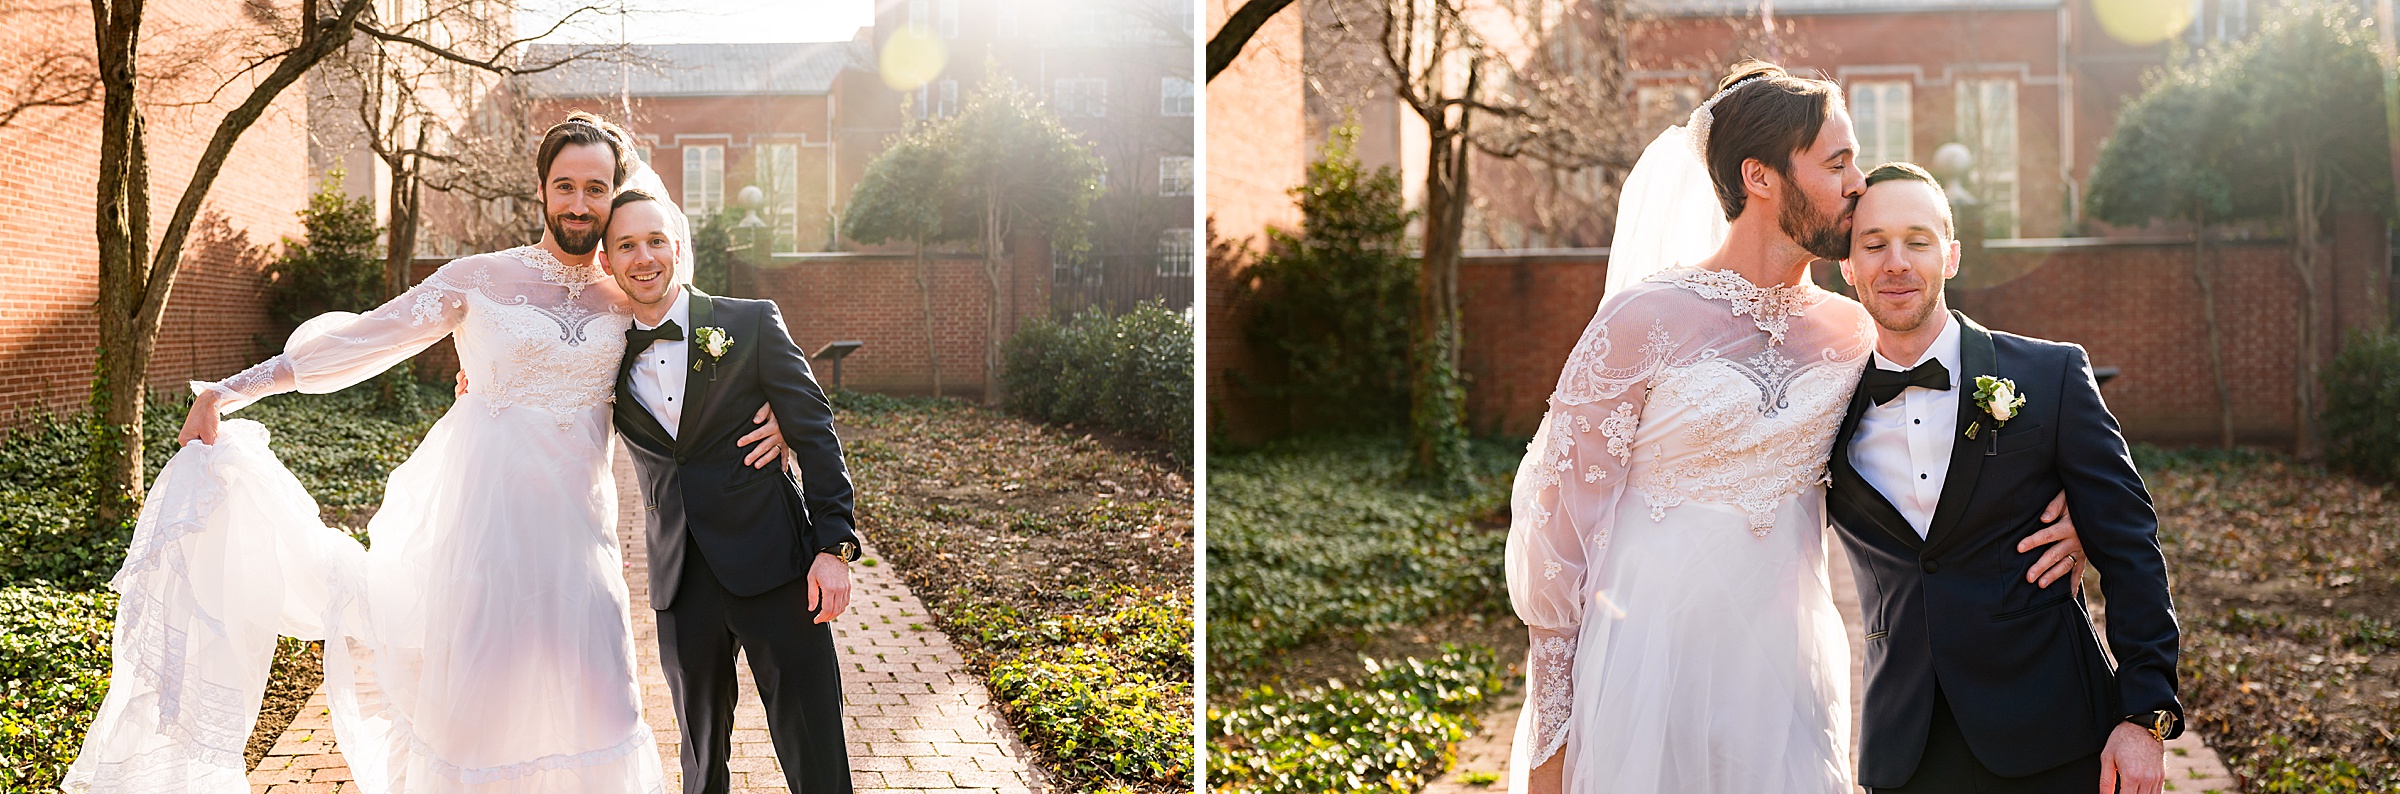 Two photos of a bride and groom posing in front of a brick wall at their Wedding.